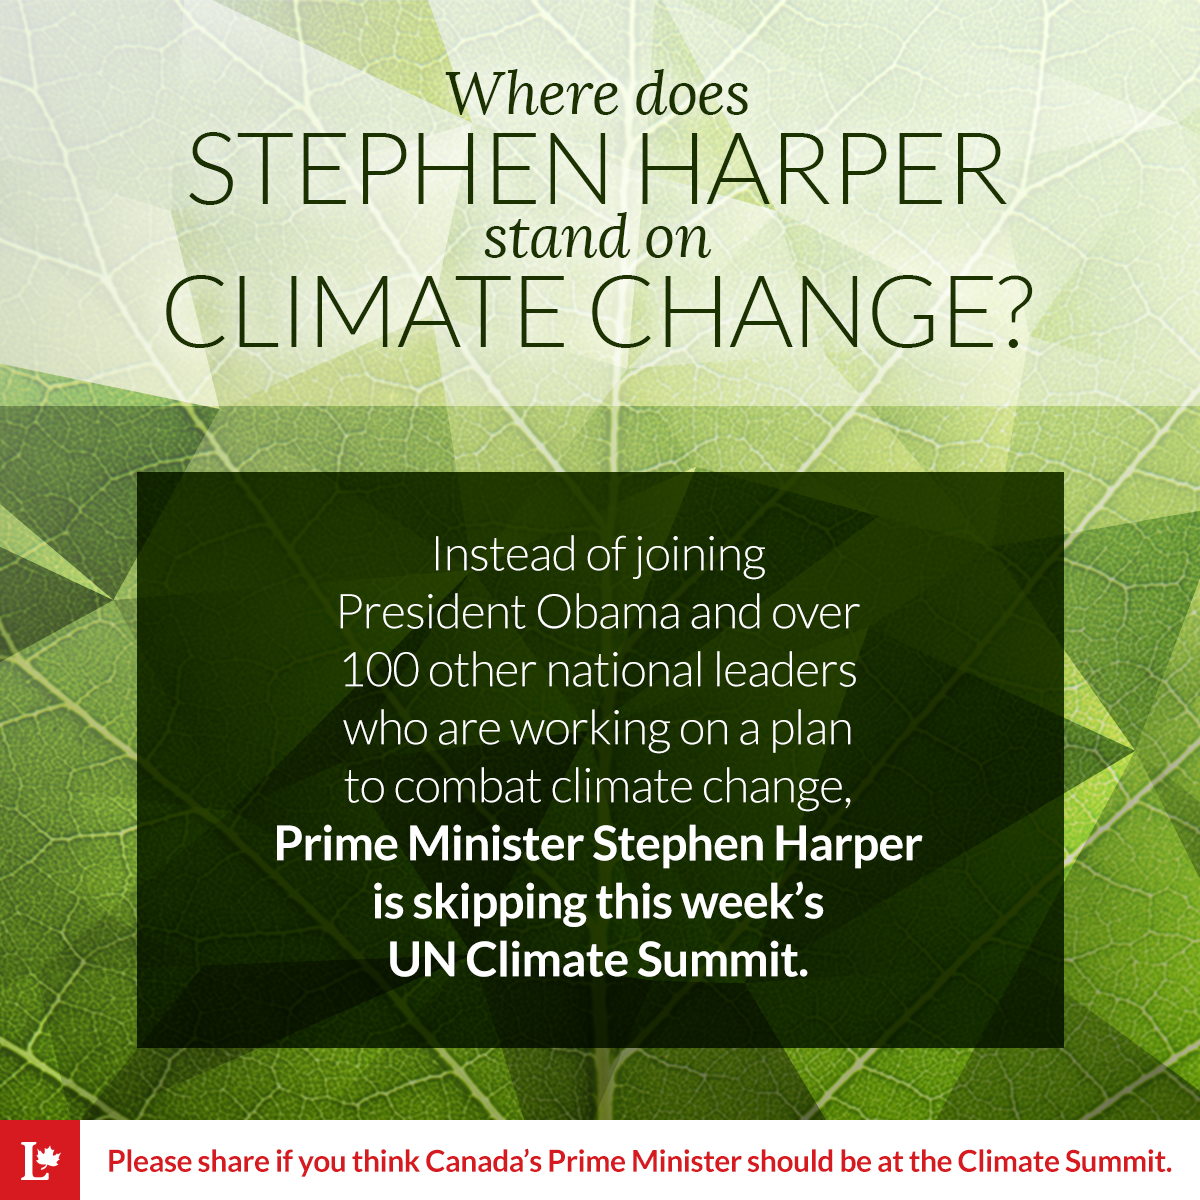 Instead of joining President Obama and over 100 other national leaders who are working on a plan to combat climate change, Prime Minister Stephen Harper is skipping this week's UN Climate Summit.